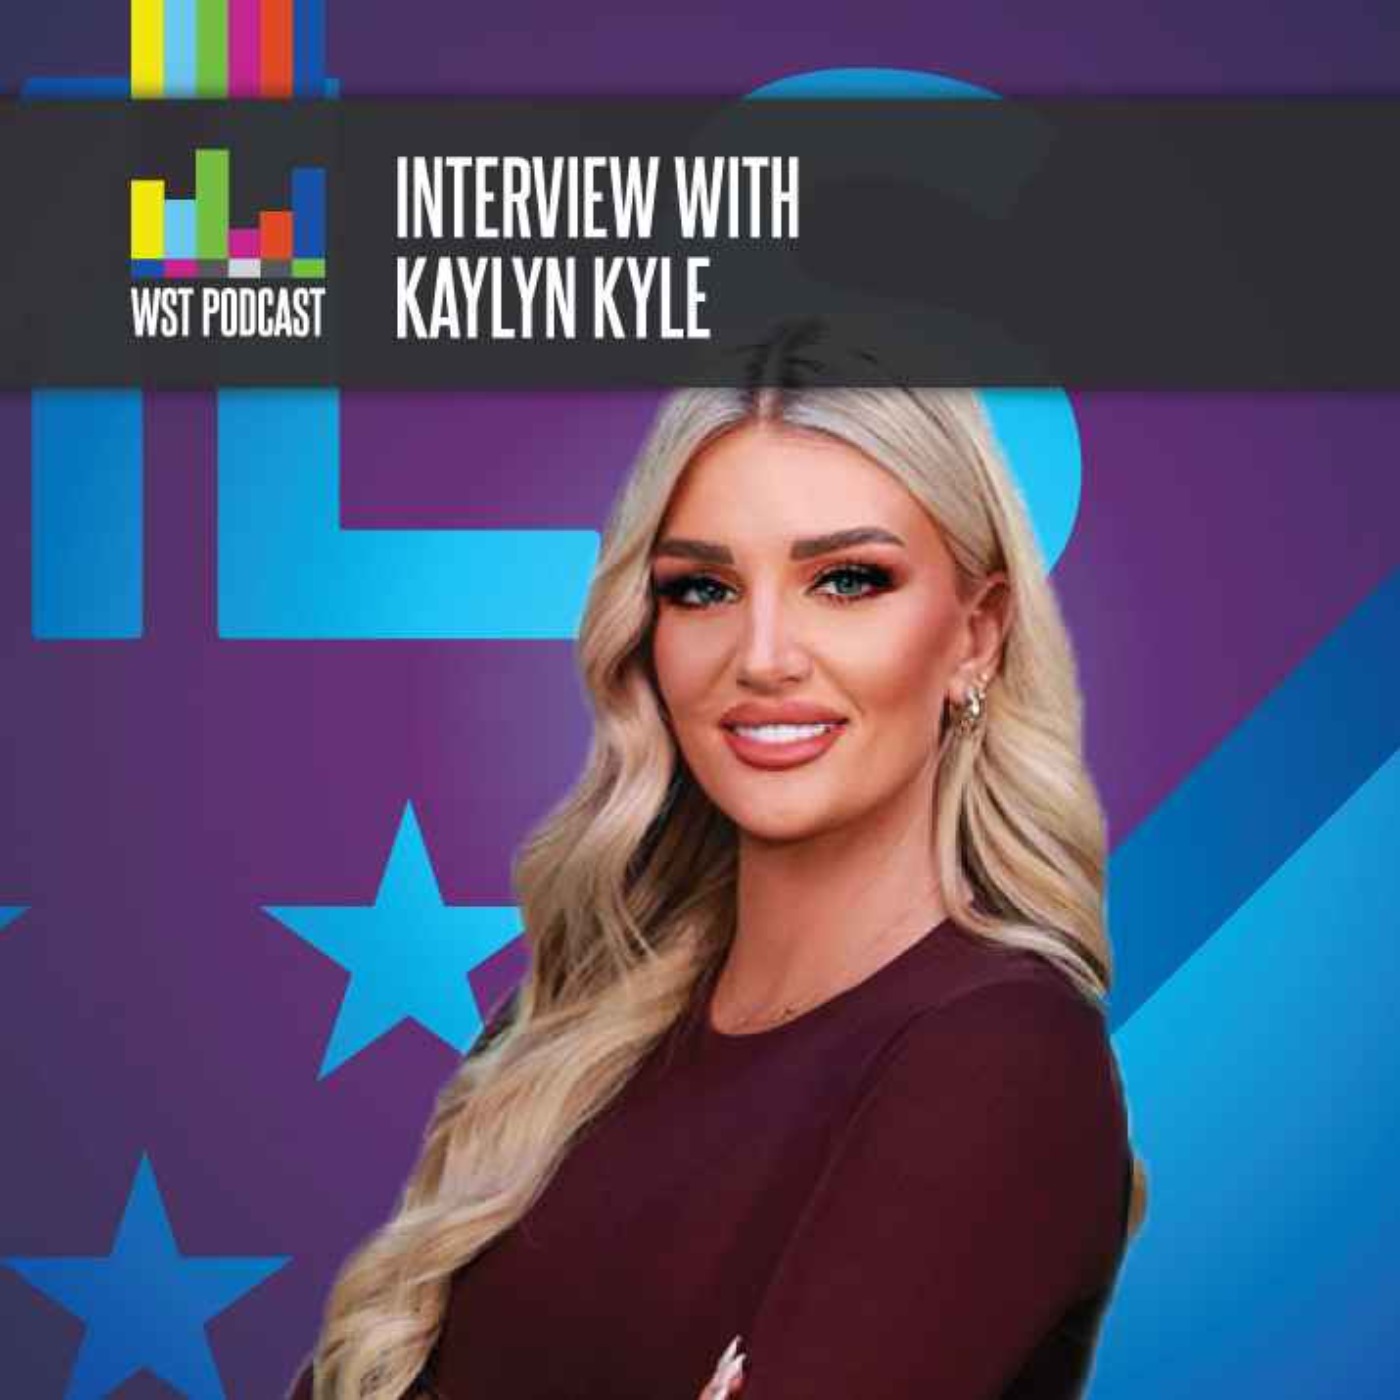 Kaylyn Kyle on MLS Season Pass and her career in broadcasting